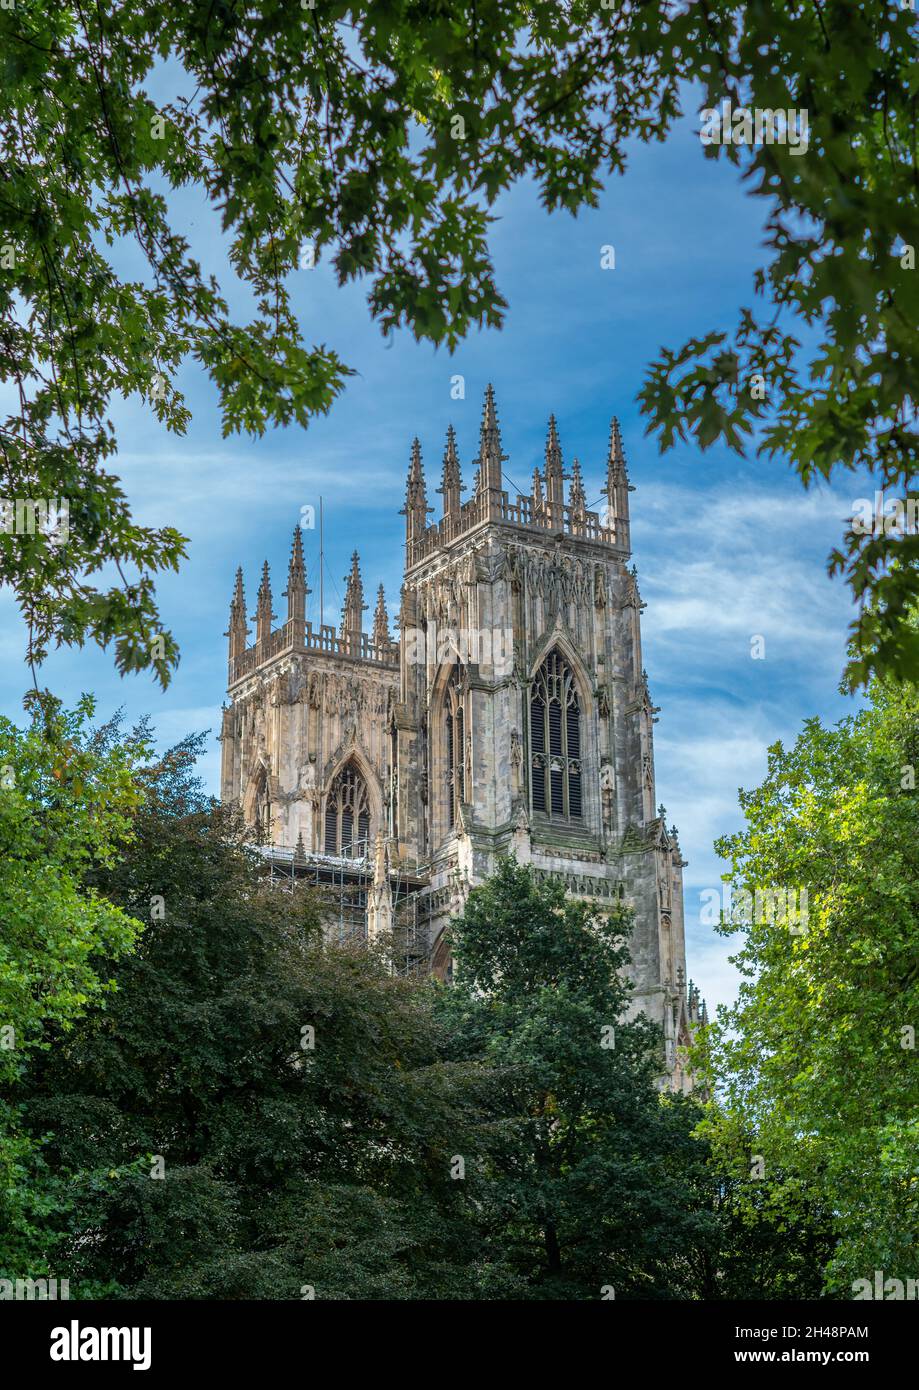 York, Yorkshire, England, 8th October 2021 - York Minster Towers viewed through green trees with a blue sky background. Stock Photo